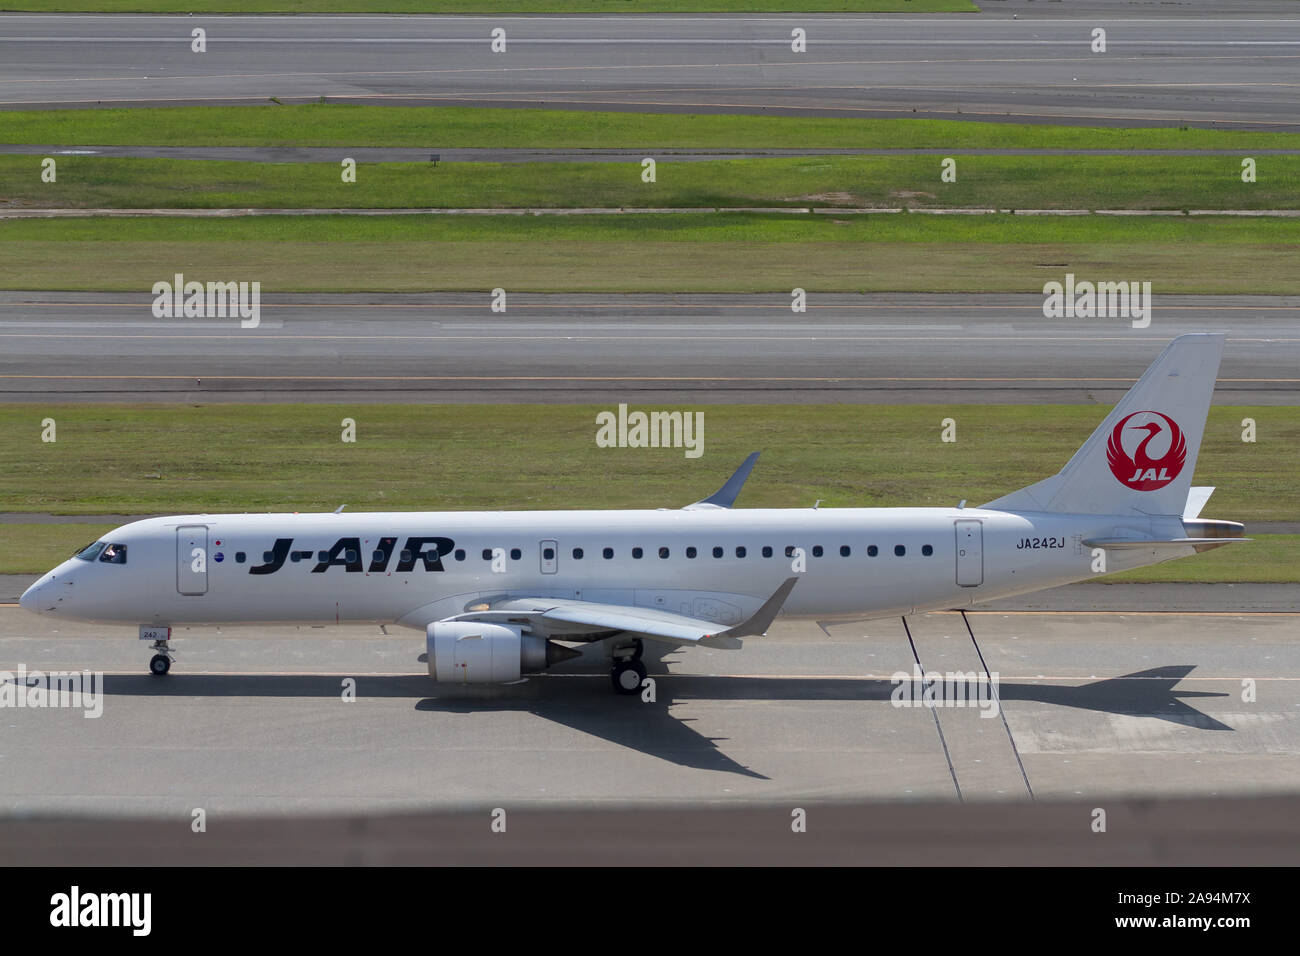 An Embraer 190-100STD operated by J-Air (part of the JAL group) at Haneda Airport, Tokyo, Japan. Stock Photo